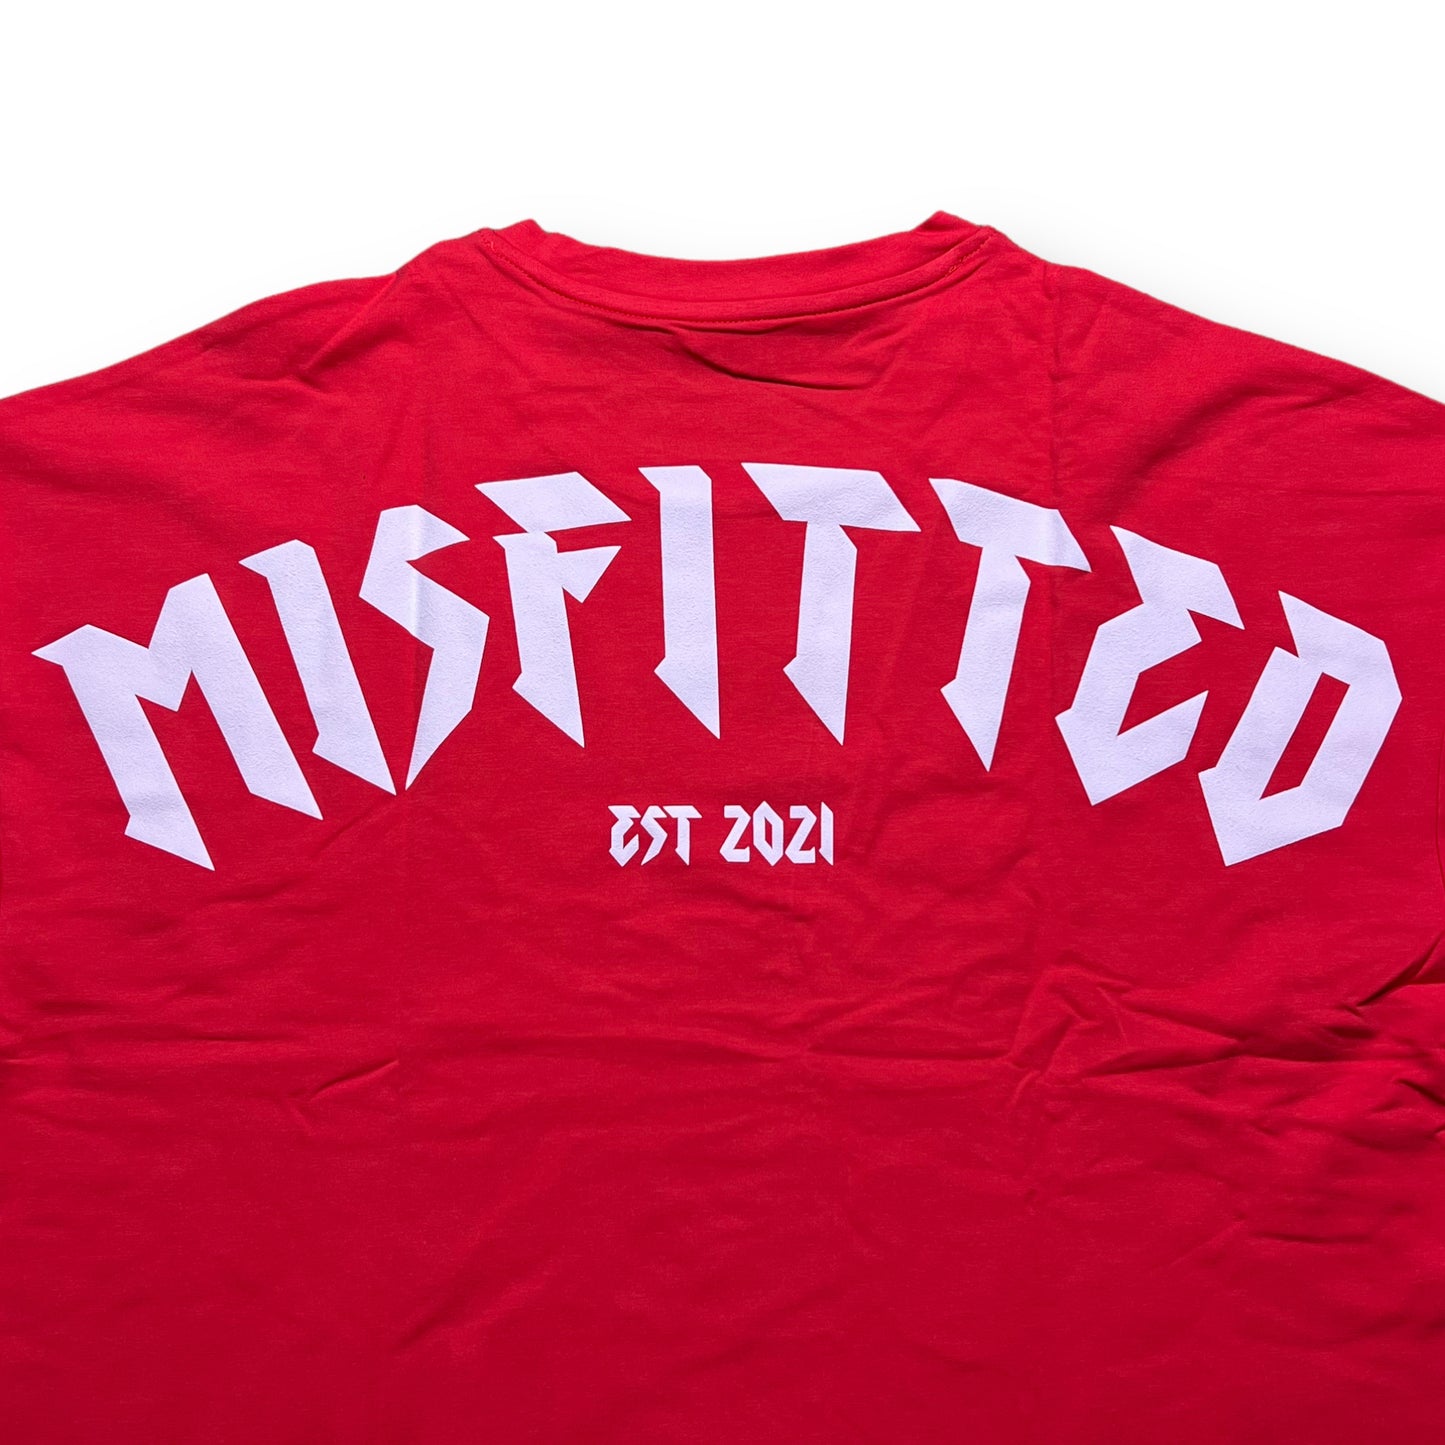 Misfitted Apparel Tee - Bright Red